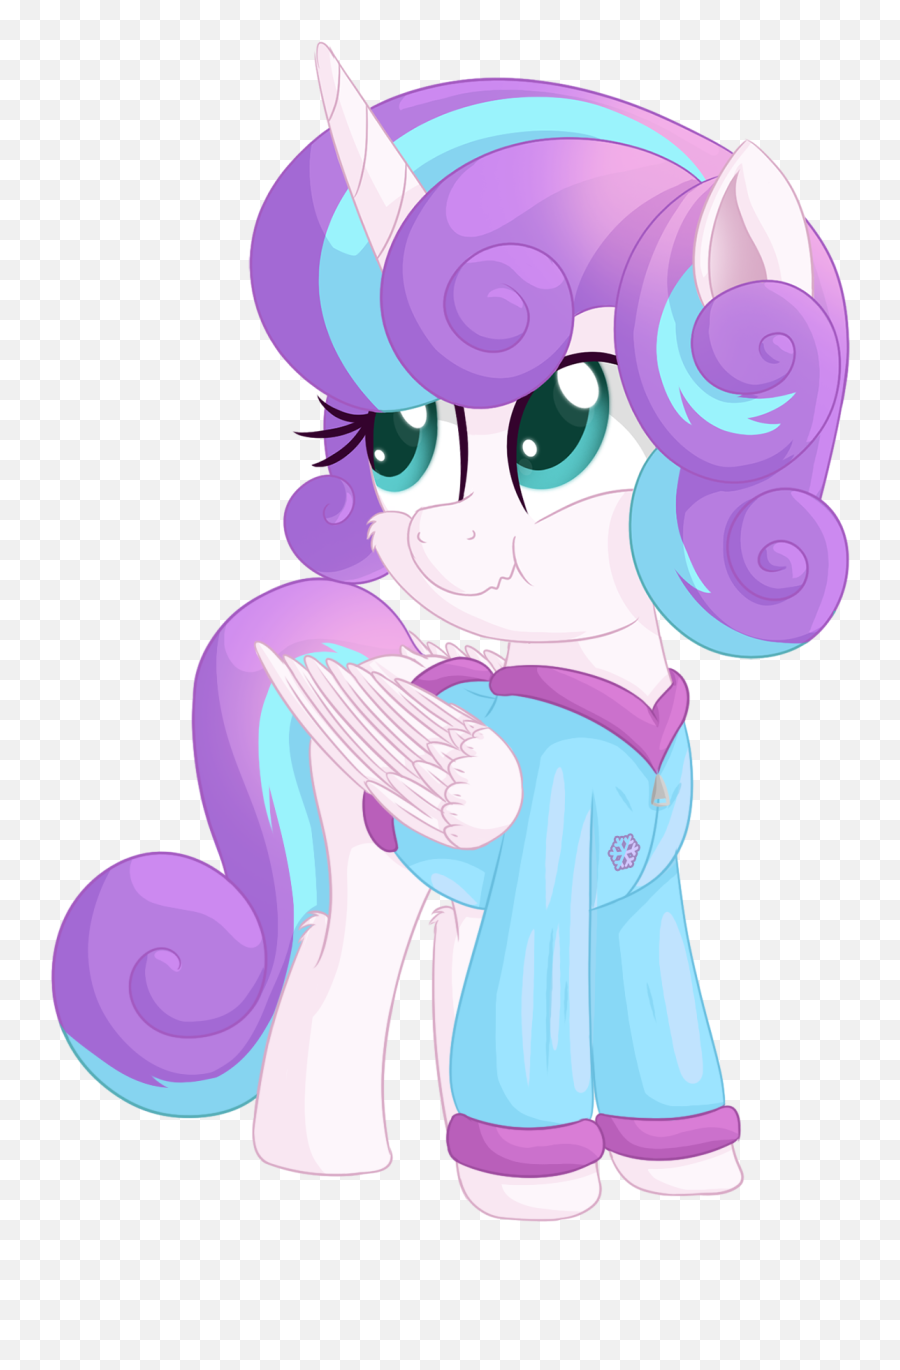 Vito Ponybooru Exclusive - Fictional Character Emoji,My Little Pony: Friendship Is Magic - A Flurry Of Emotions